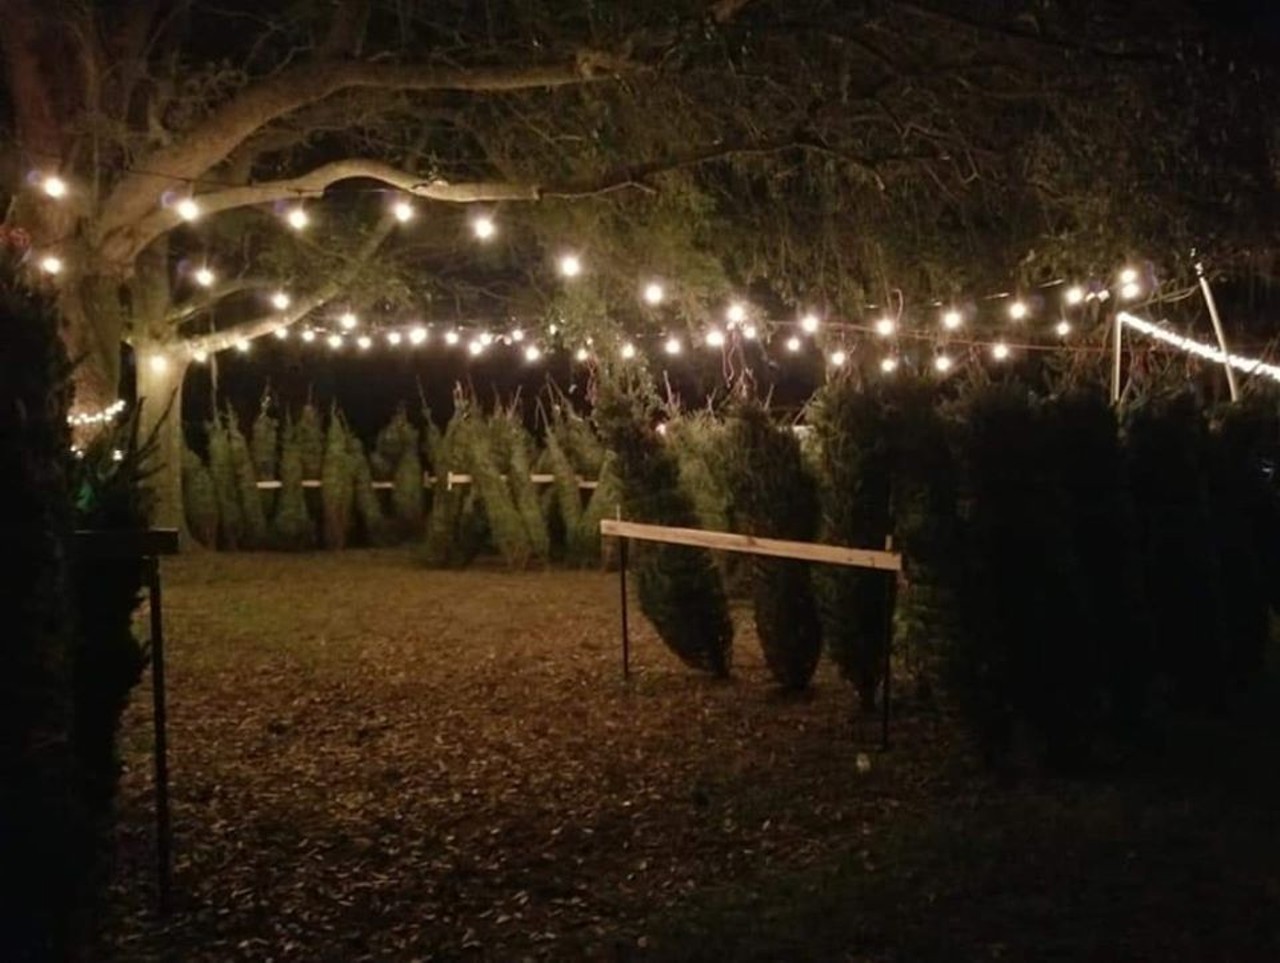 A Southern CHRISTmas Tree Farm
274000 Murrhee Rd., Hilliard, Florida 32046, 904-845-7447
There will be lots to see and do at this farm, like hay rides, petting zoos and, of course, picking and cutting trees. You can start making memories with them on Nov. 29 and join them for a wreath making class on Dec. 2.
Photo via A Southern CHRISTmas Tree Farm/Facebook